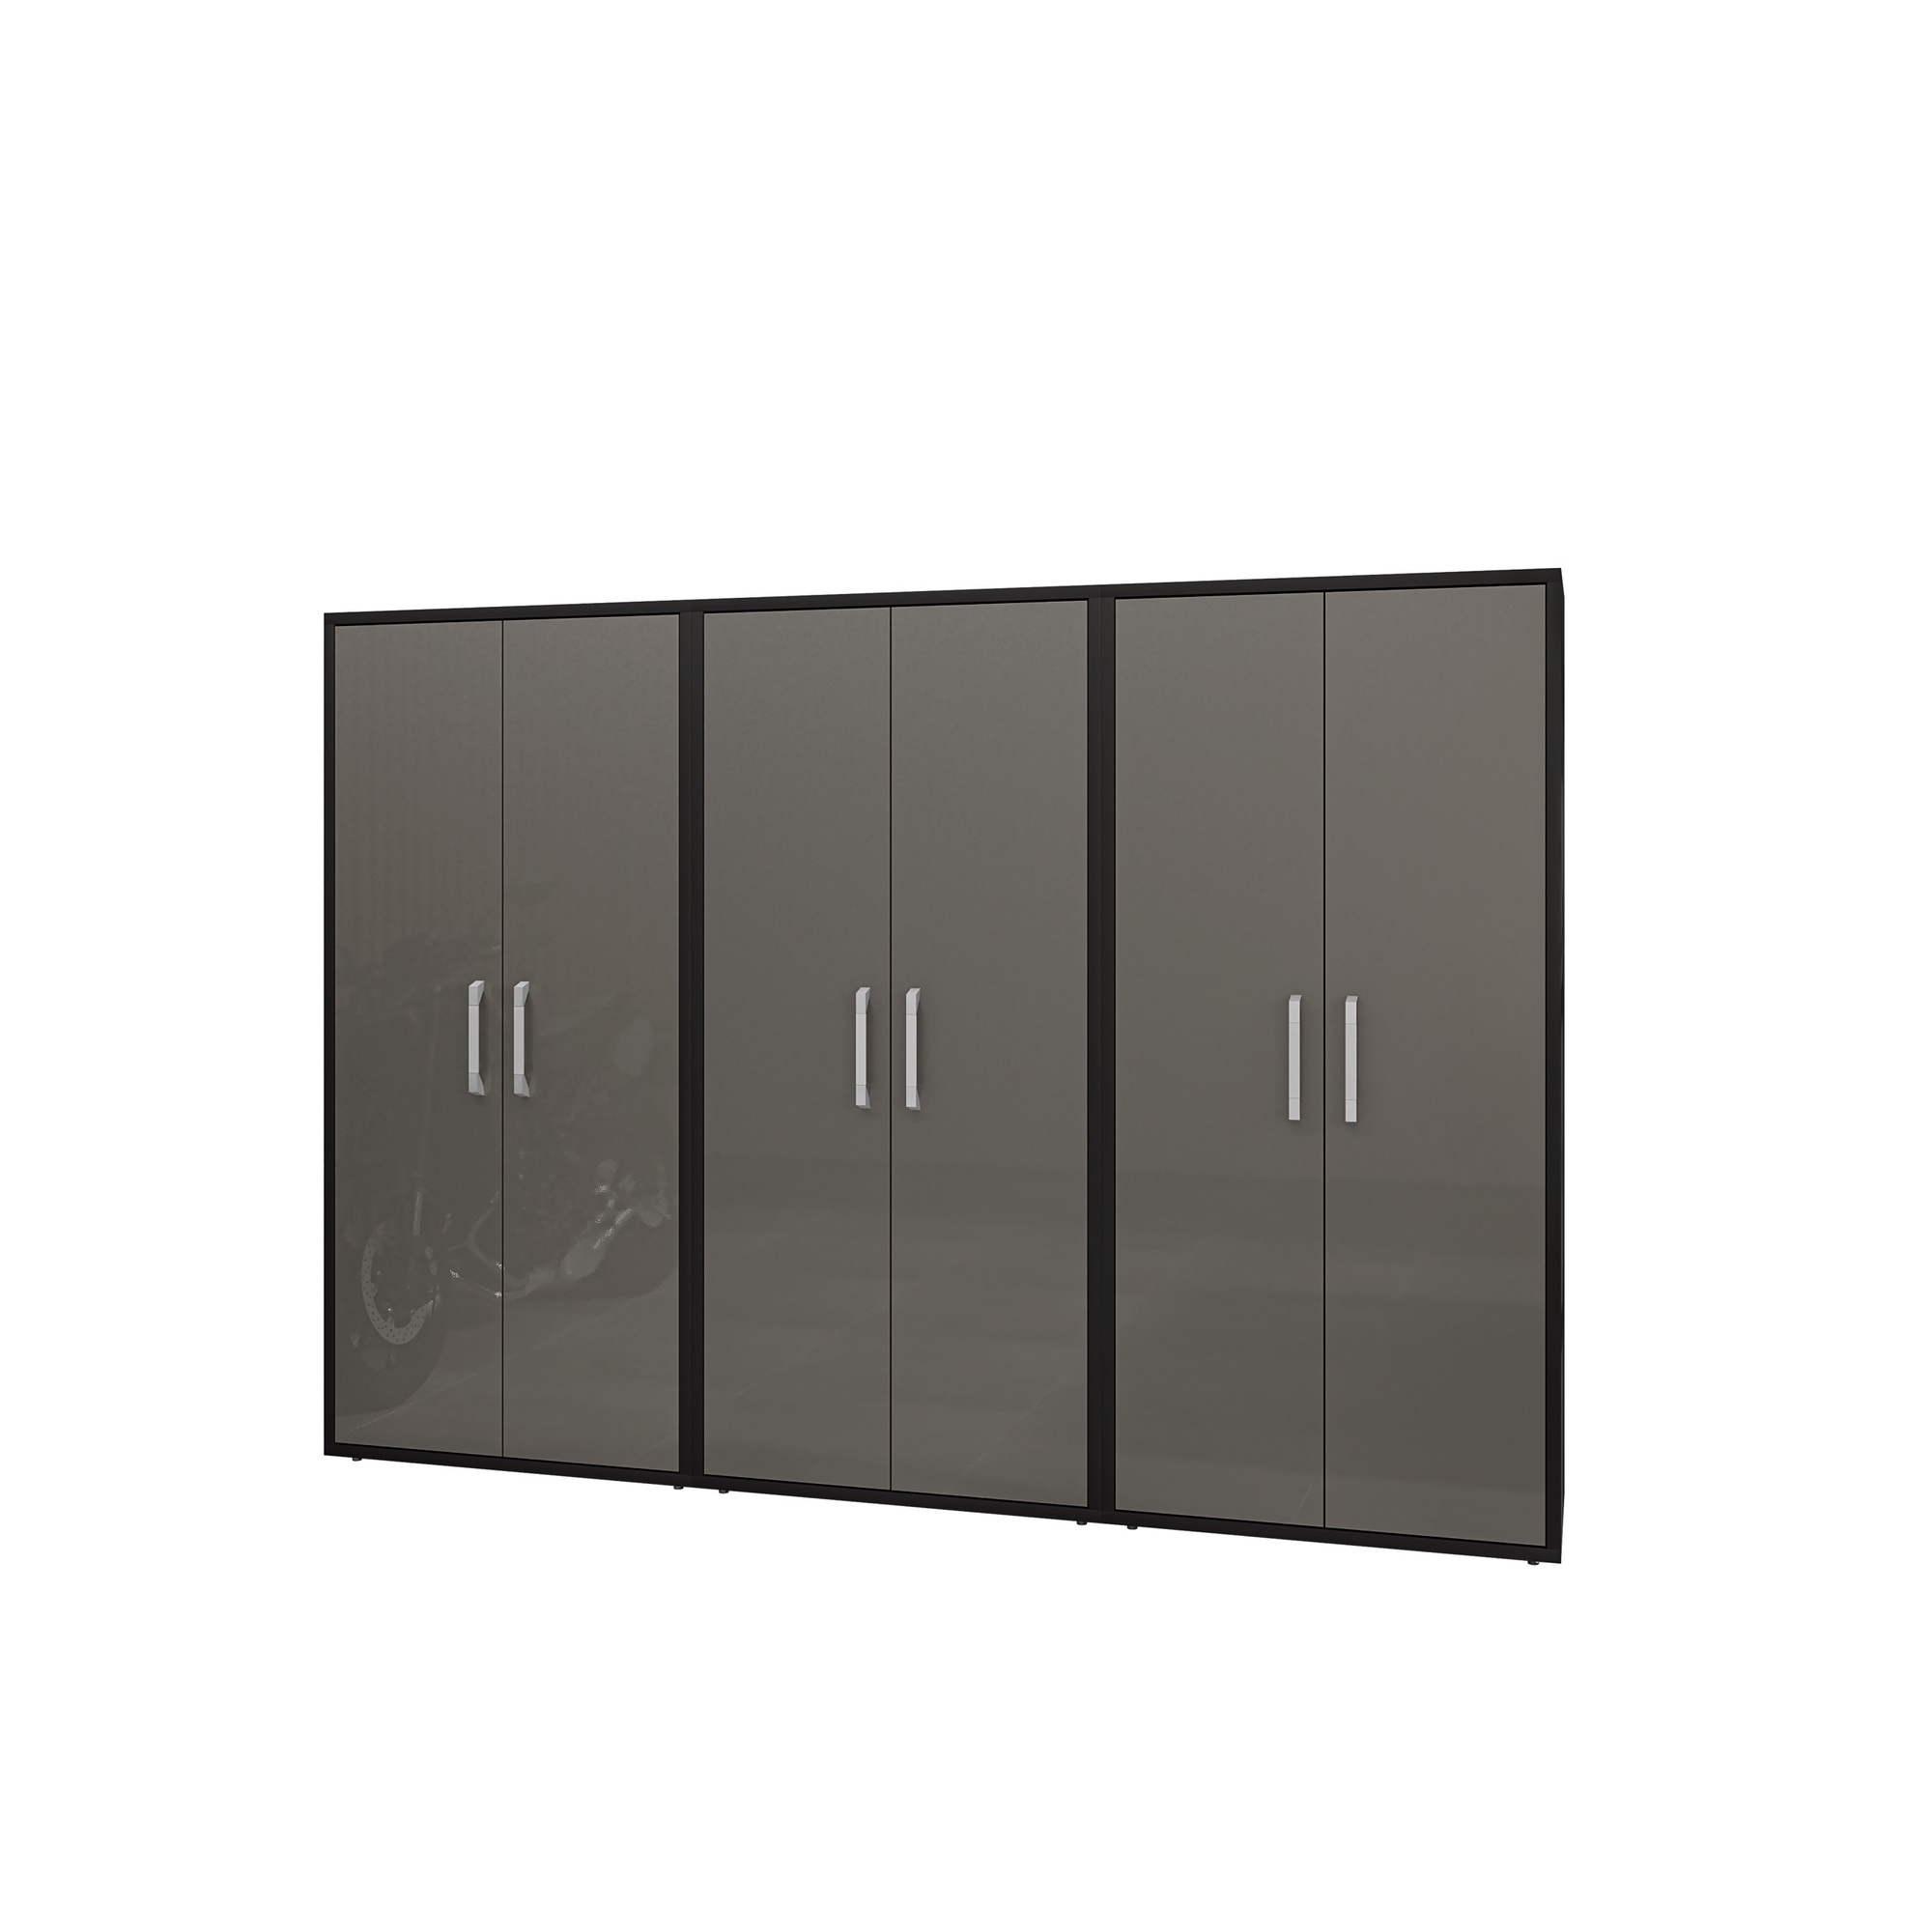 Manhattan Comfort, Eiffel Storage Cabinet Black and Grey, Set of 3 Height 73.43 in, Width 106.29 in, Color Gray, Model 3-250BMC